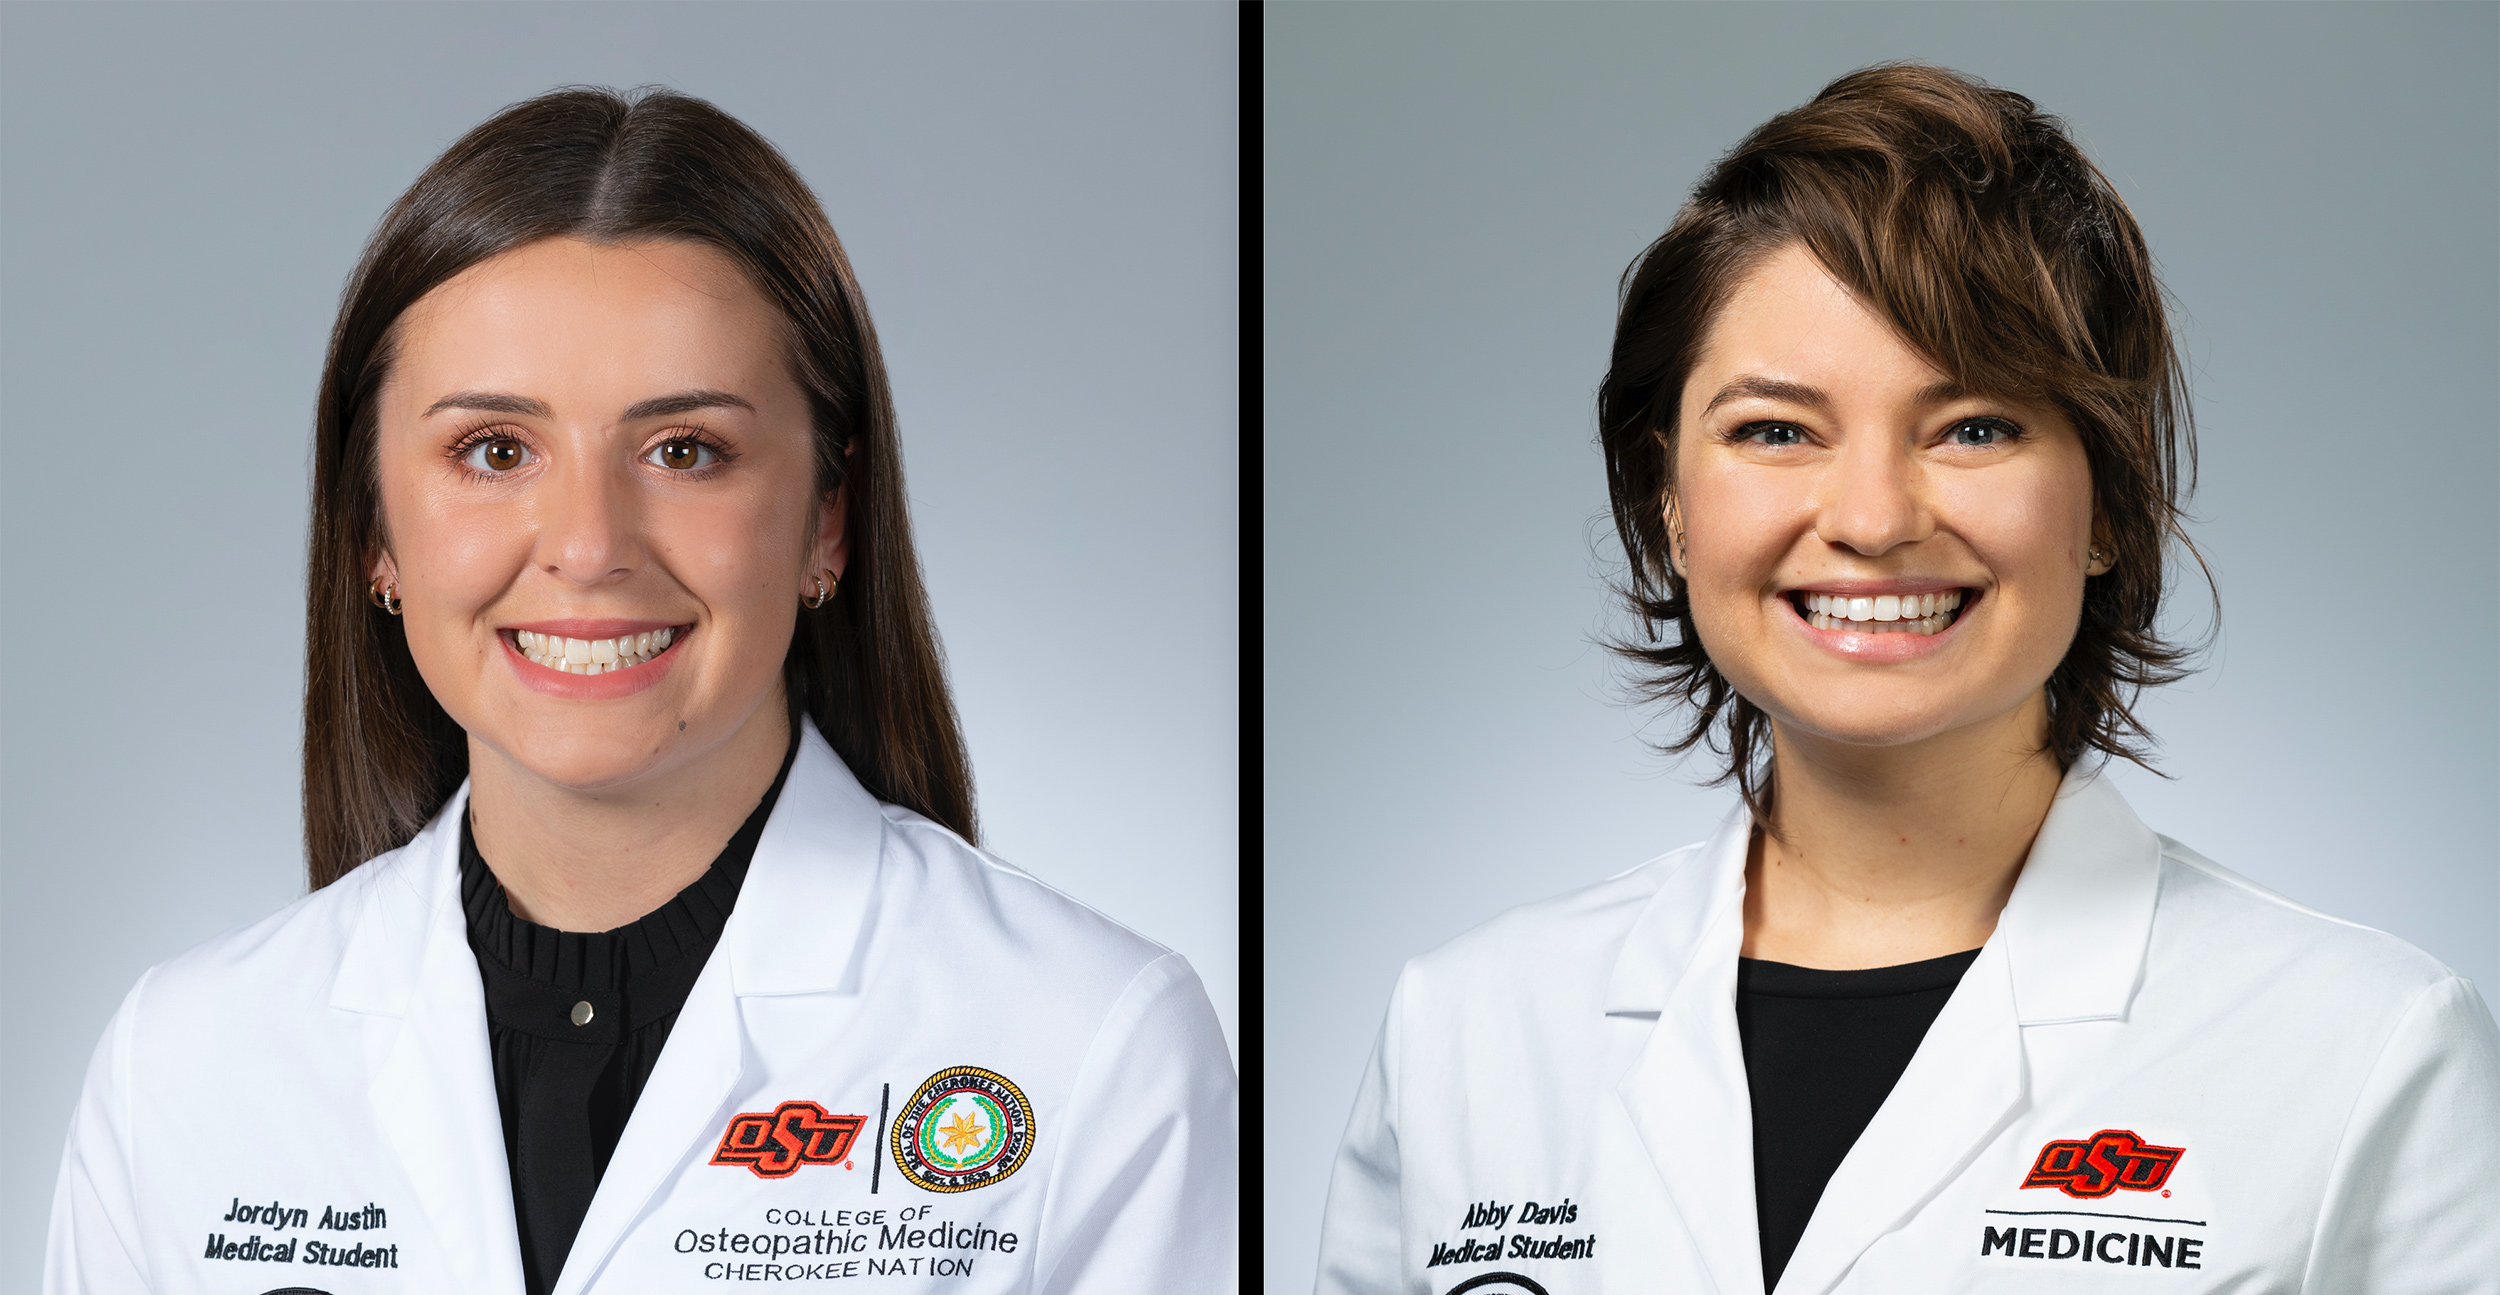 Jordyn Austin, left, and Abby Davis, both second year medical students at OSU College of Osteopathic Medicine, pose together while at Operation Orange.